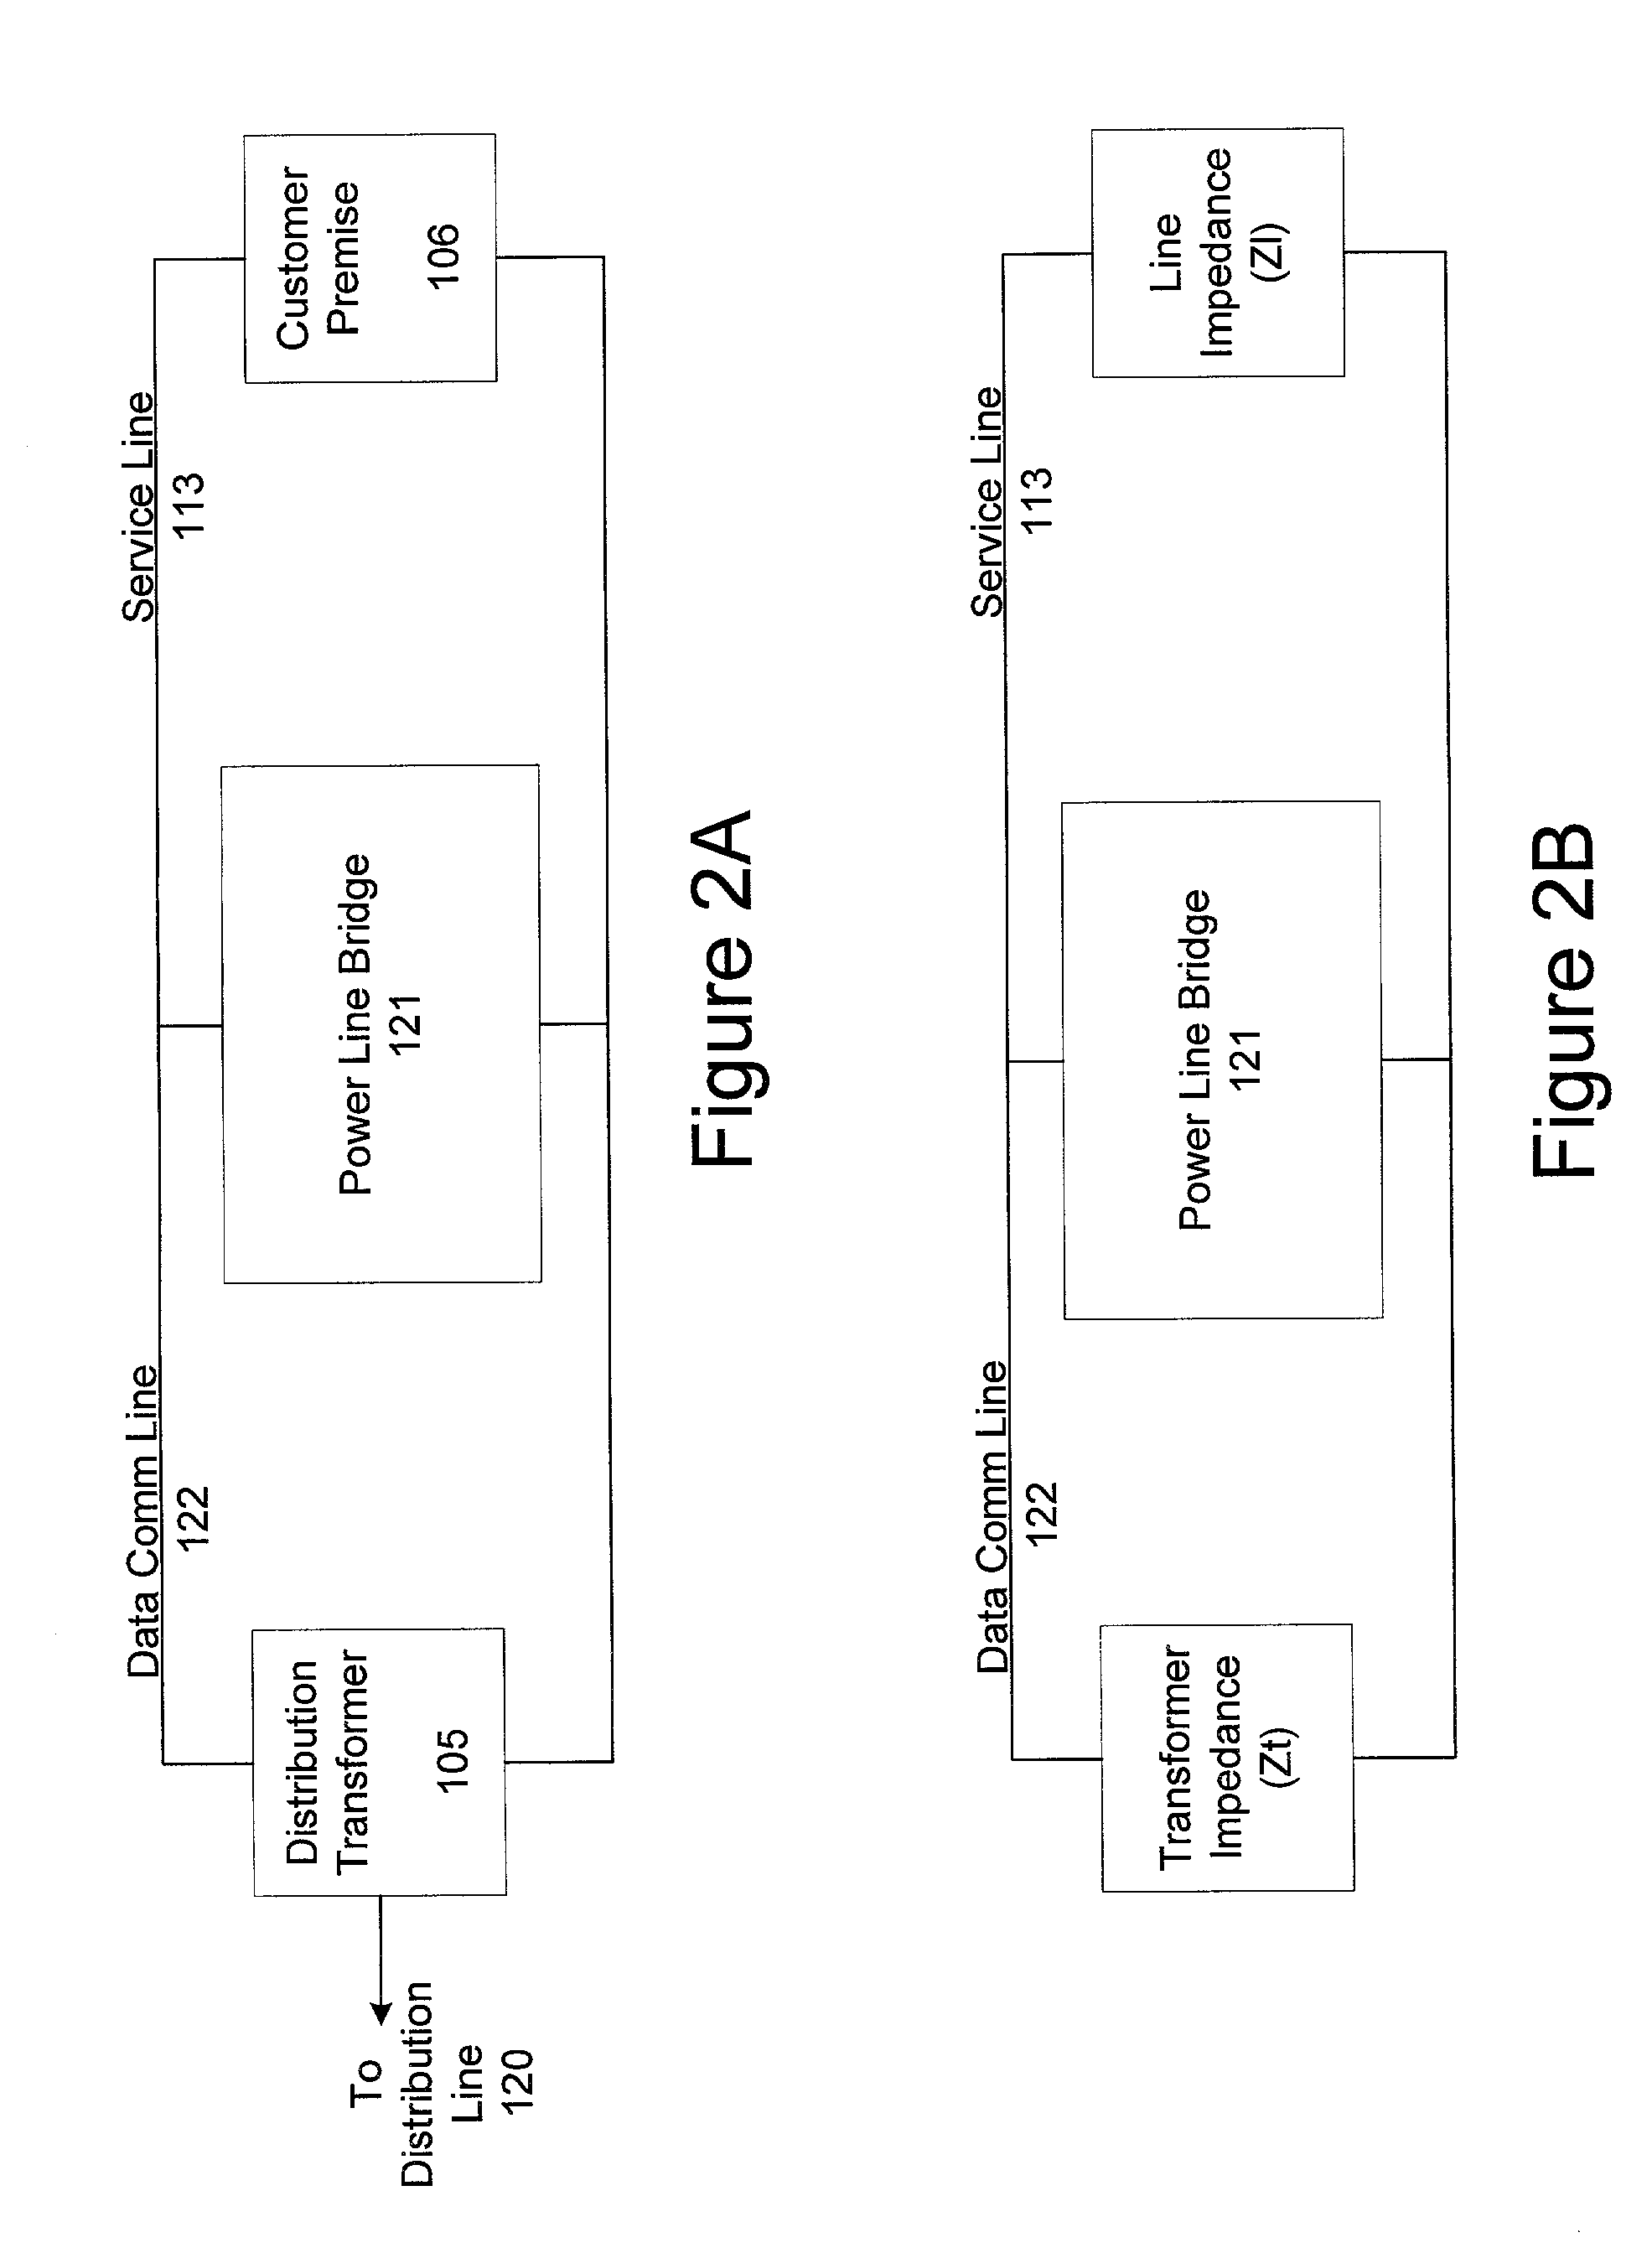 Facilitating communication of data signals on electric power systems